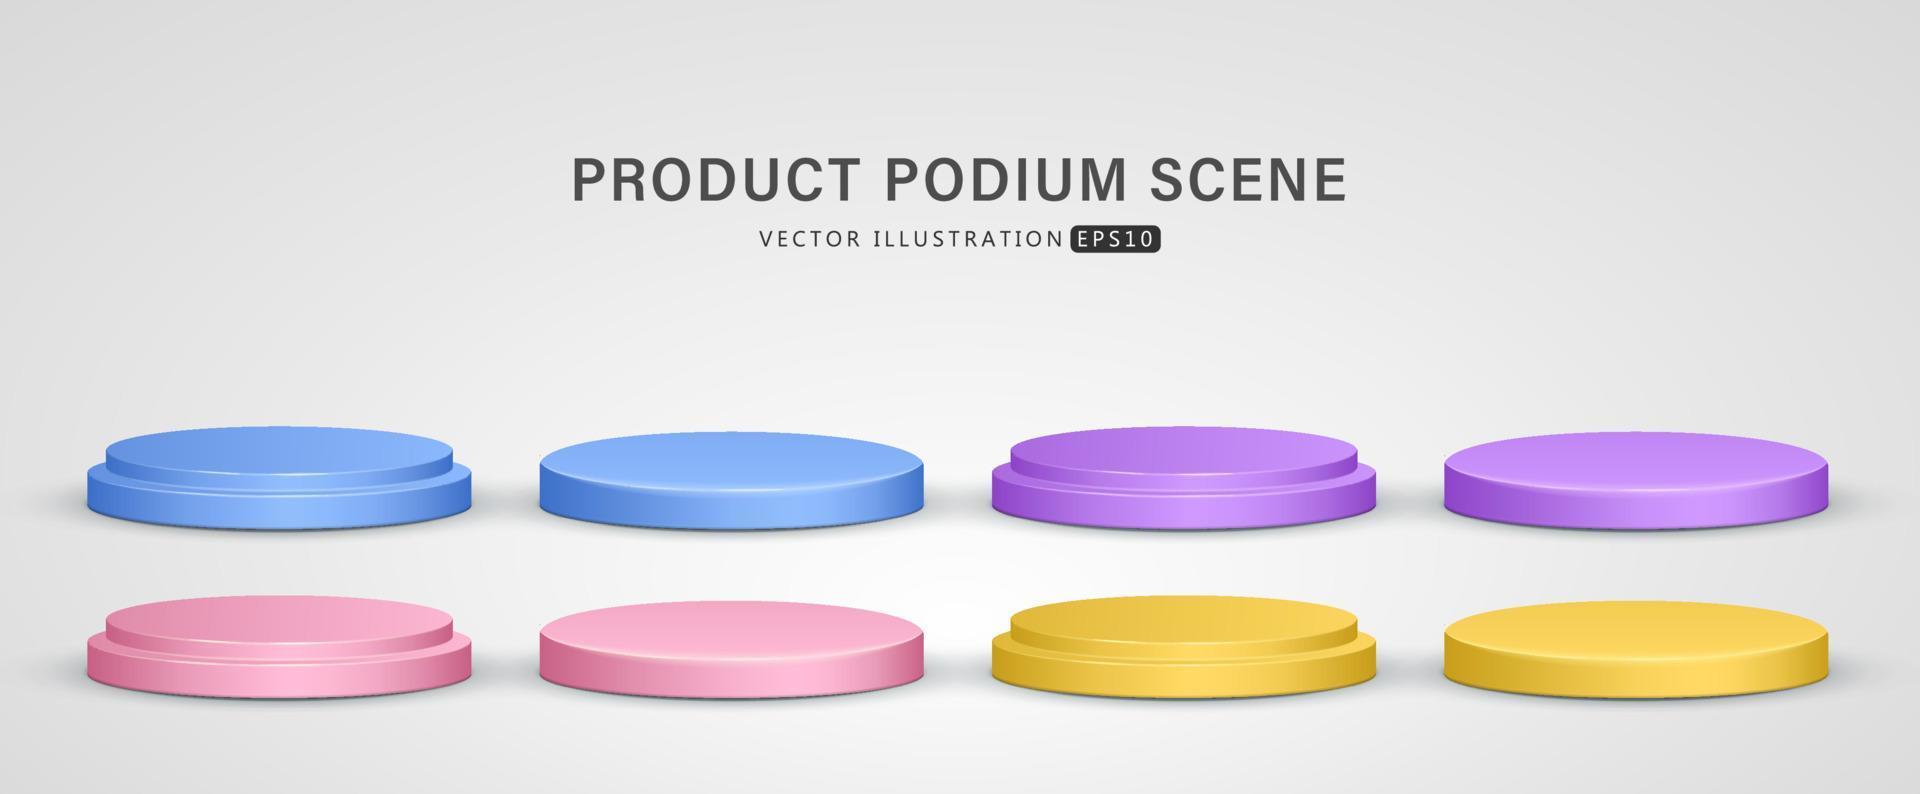 Set of realistic blue, pink, yellow and purple cylinder step pedestal podium shadow isolate in white background for scene show product display. 3D vector